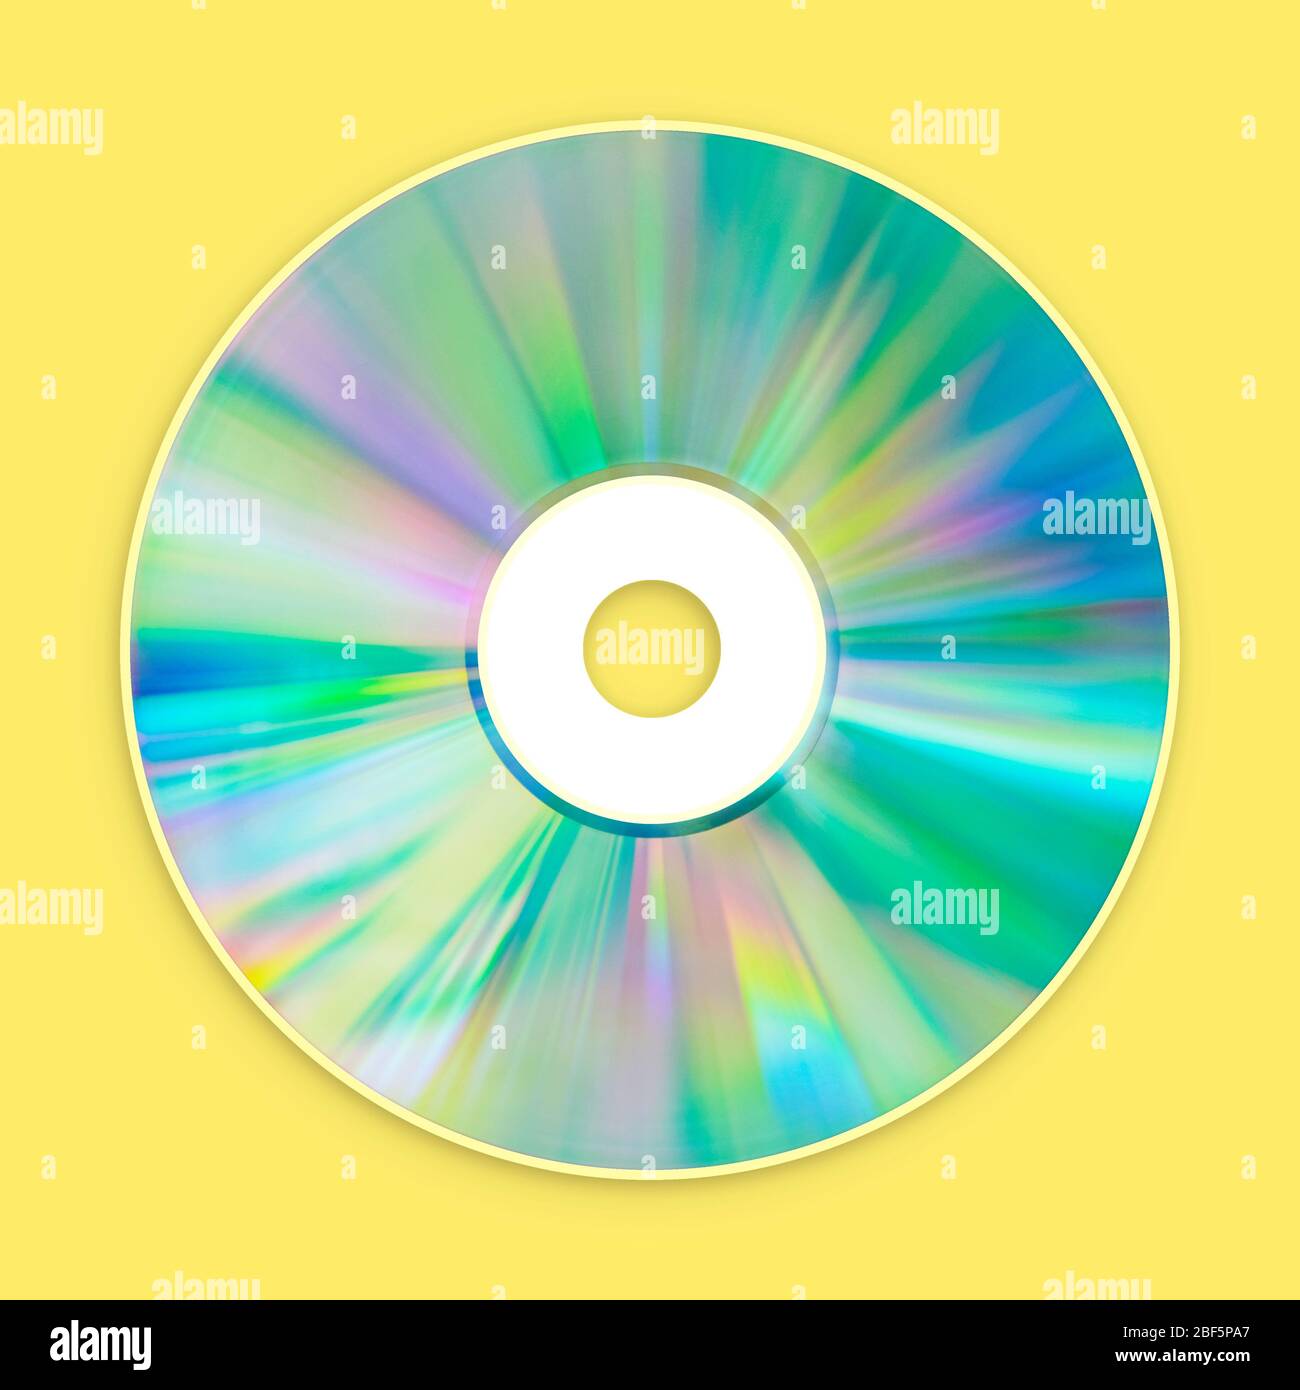 Cd Compact Disk Dvd Blu Ray For Music Movies And Data Close Up Isolated And Presented In Punchy Pastel Colors For Nostalgic Creative Design Stock Photo Alamy